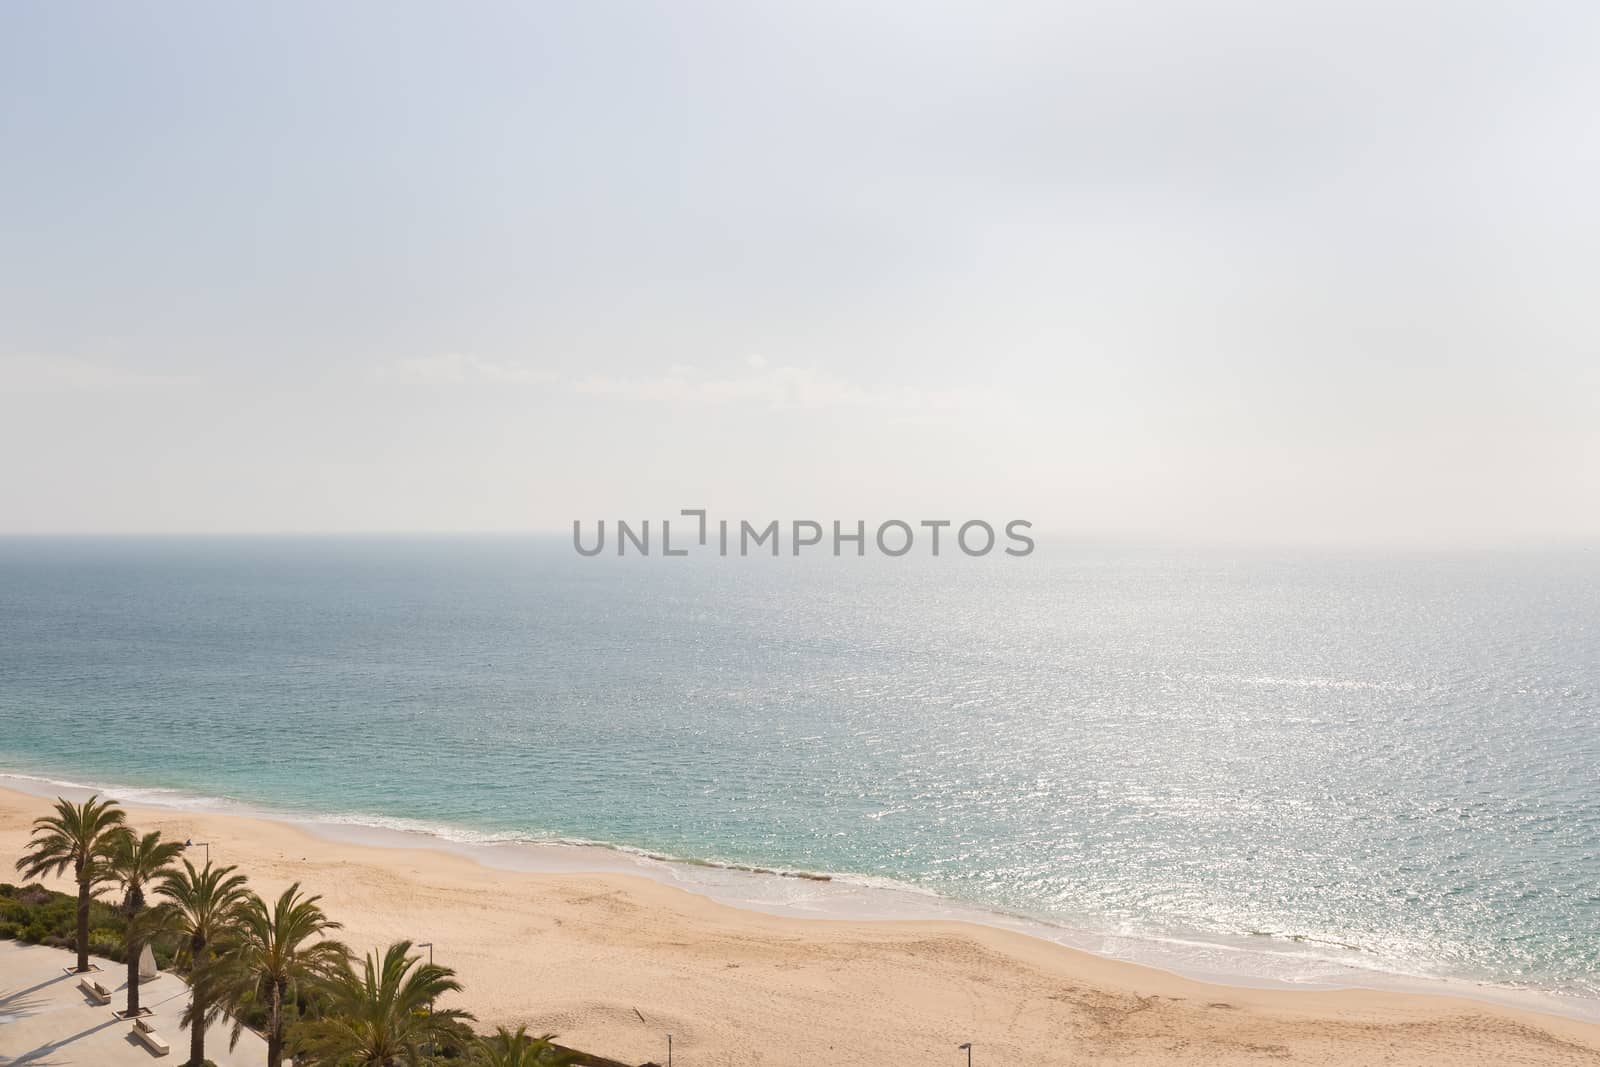 aerial view of Sesimbra beach, Portugal with palm trees and fine sand